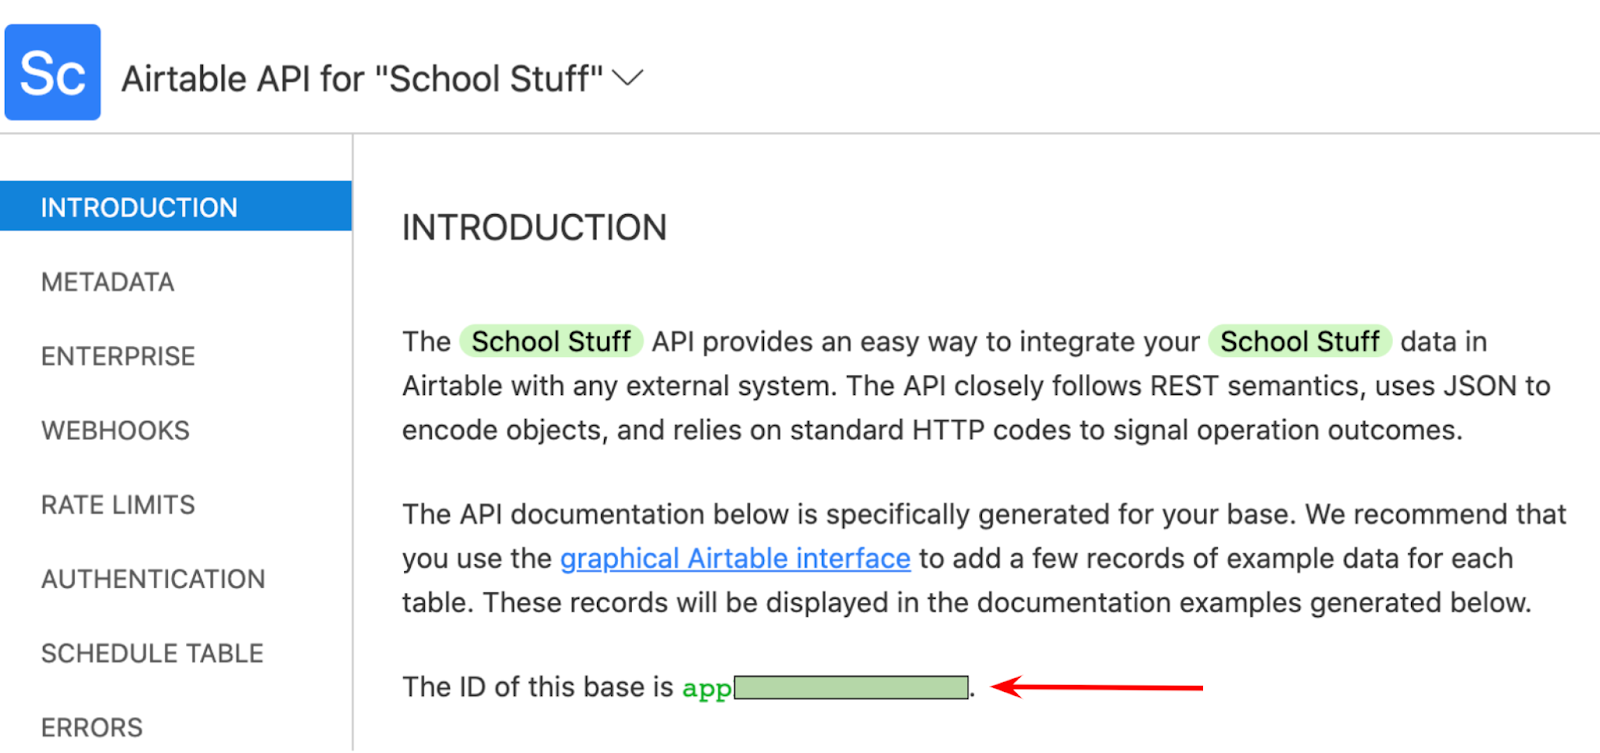 Airtable API Documentation page for School Stuff base. An arrow is pointed to the base ID.